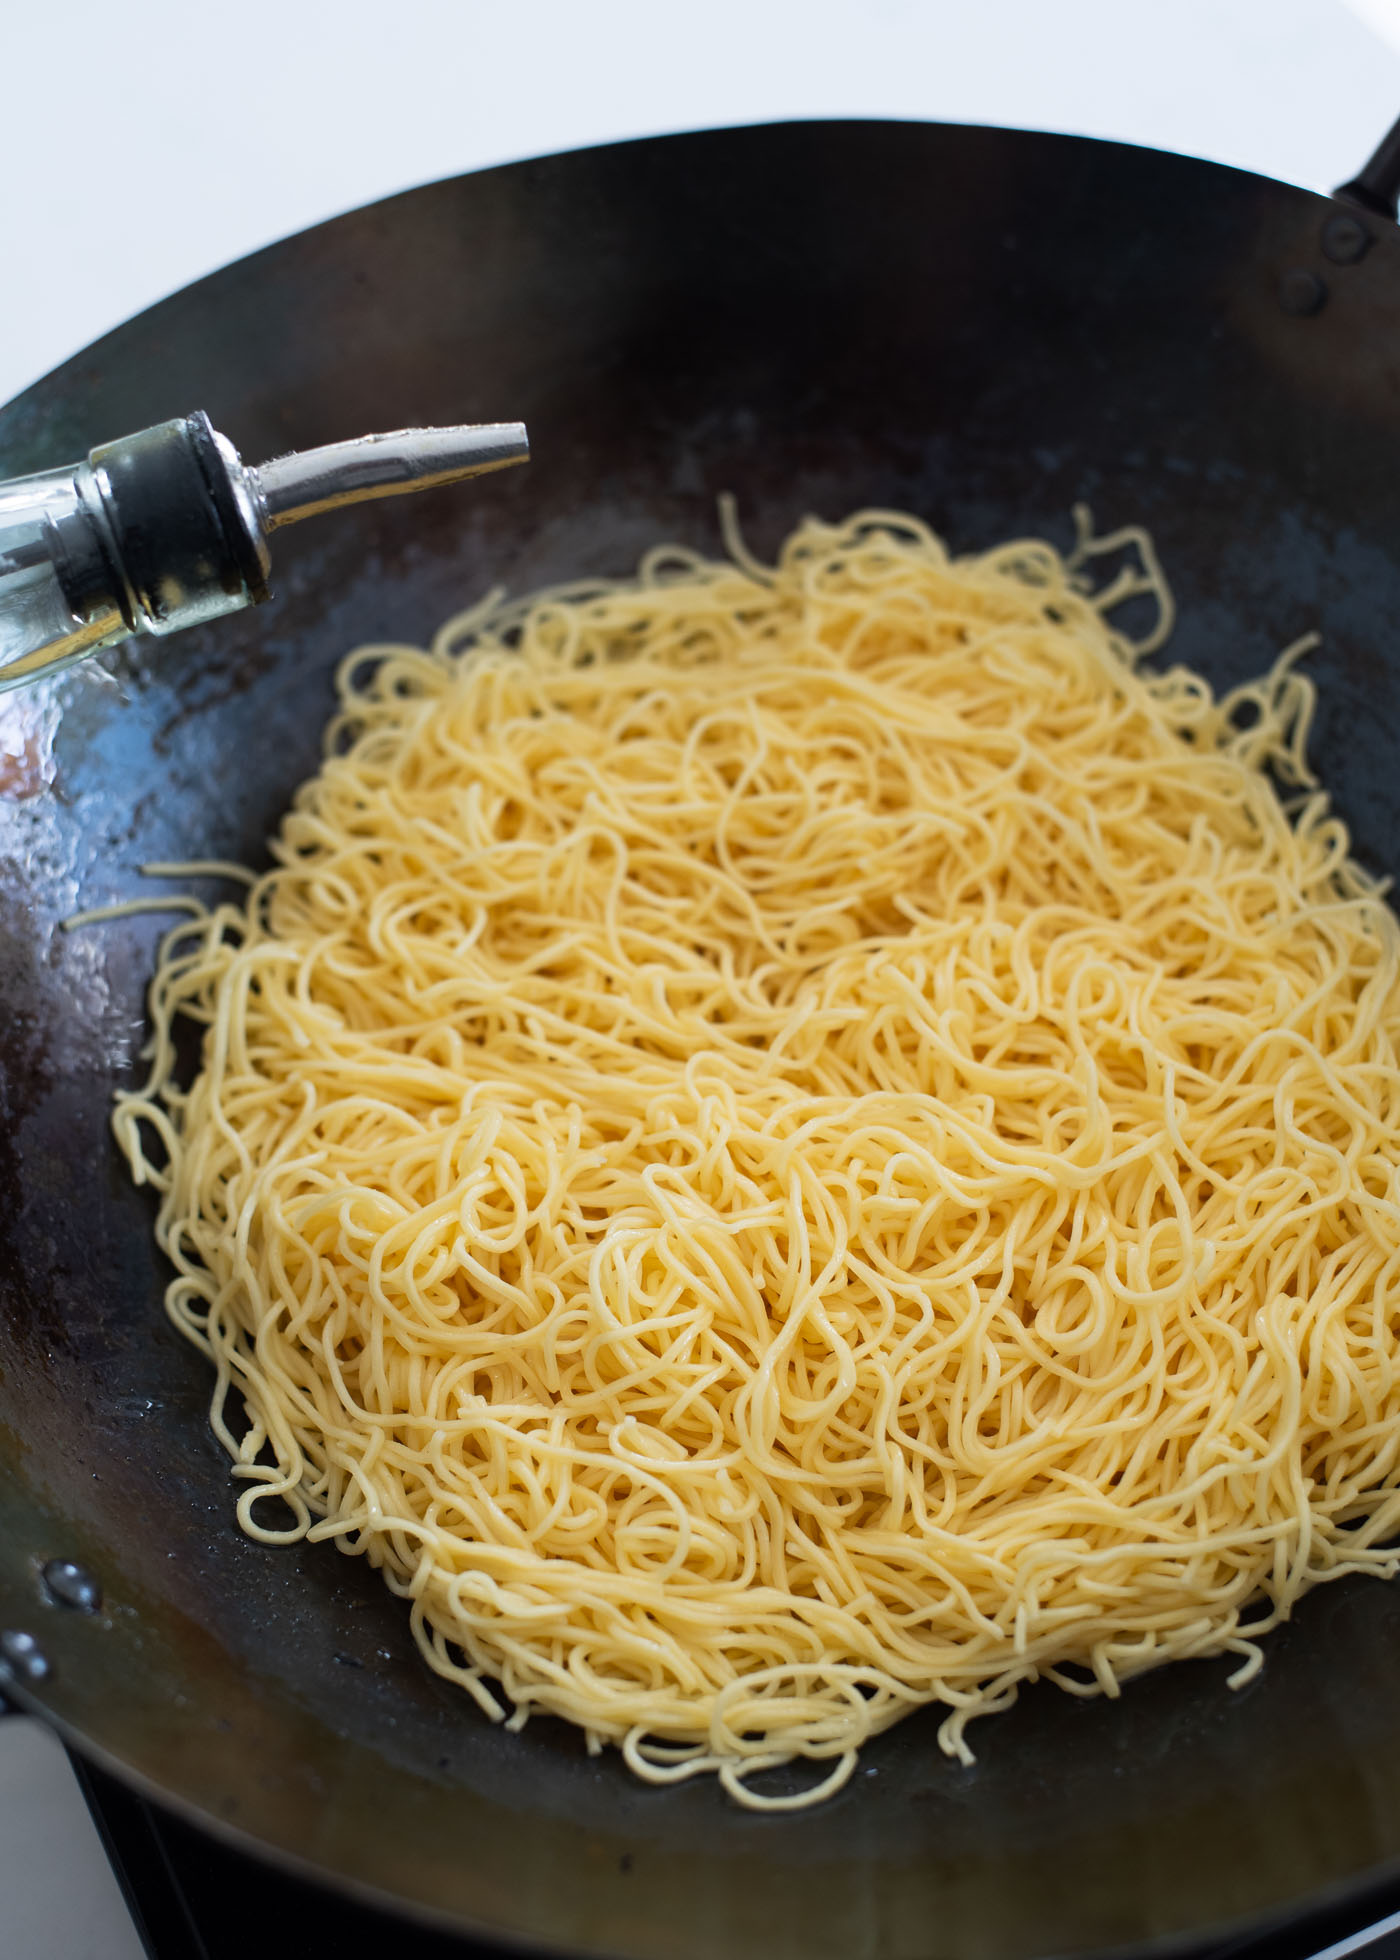 Cooked egg noodles are placed in a wok and oil is drizzled around,